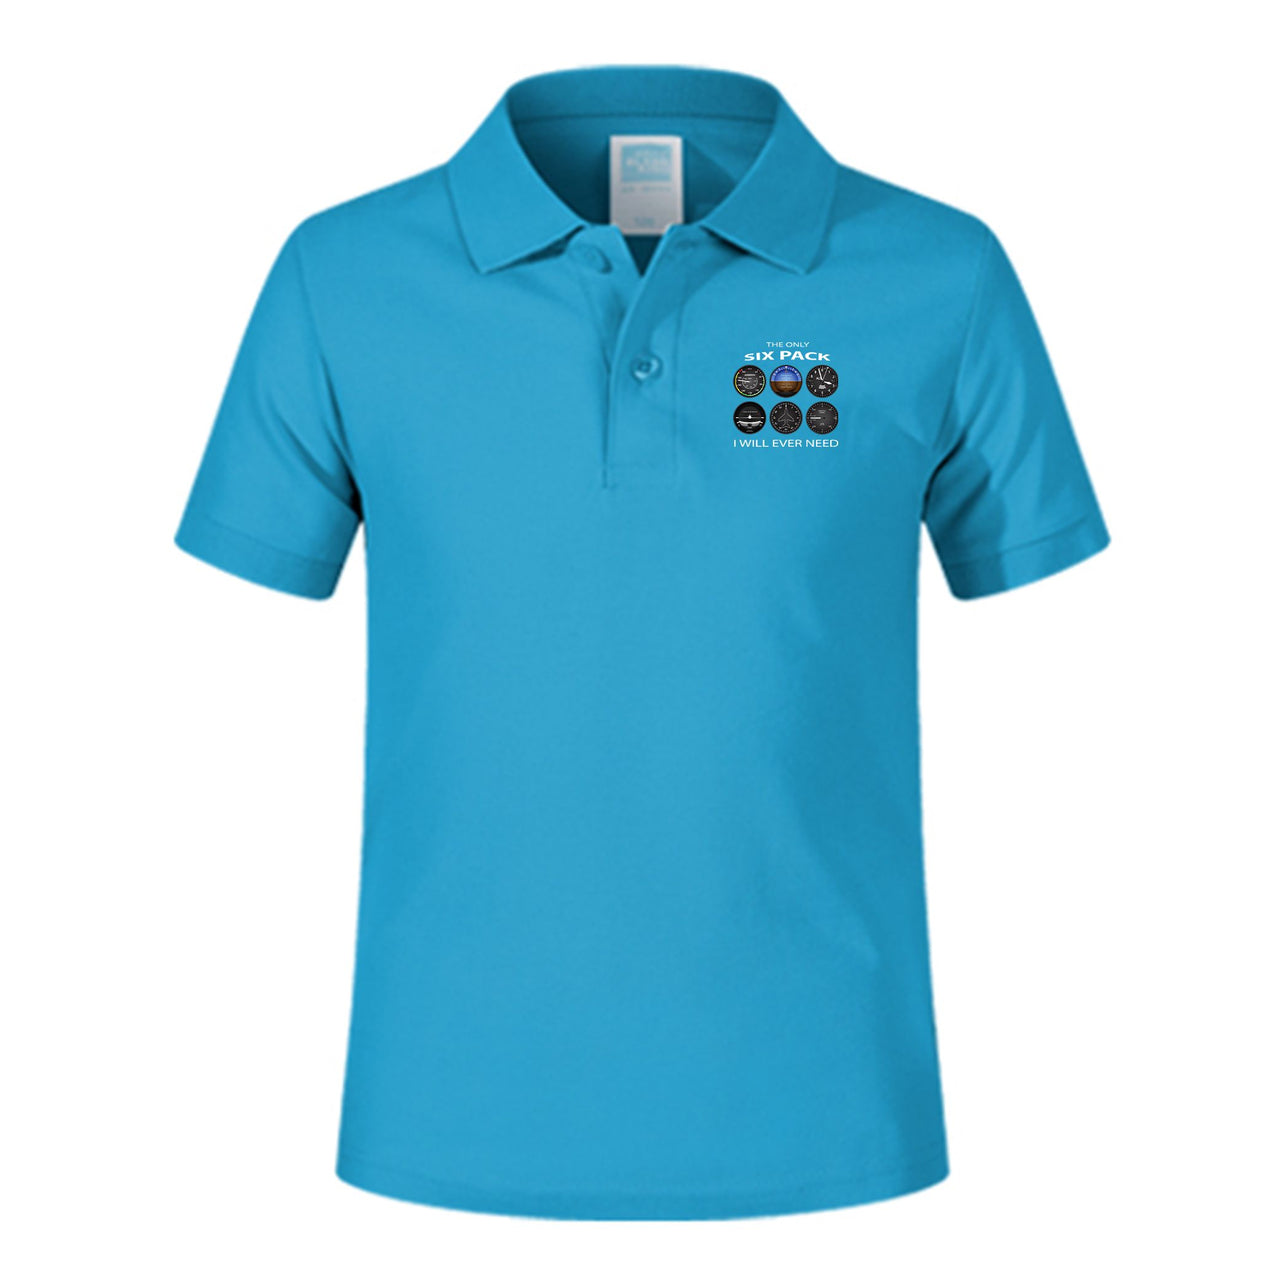 The Only Six Pack I Will Ever Need Designed Children Polo T-Shirts